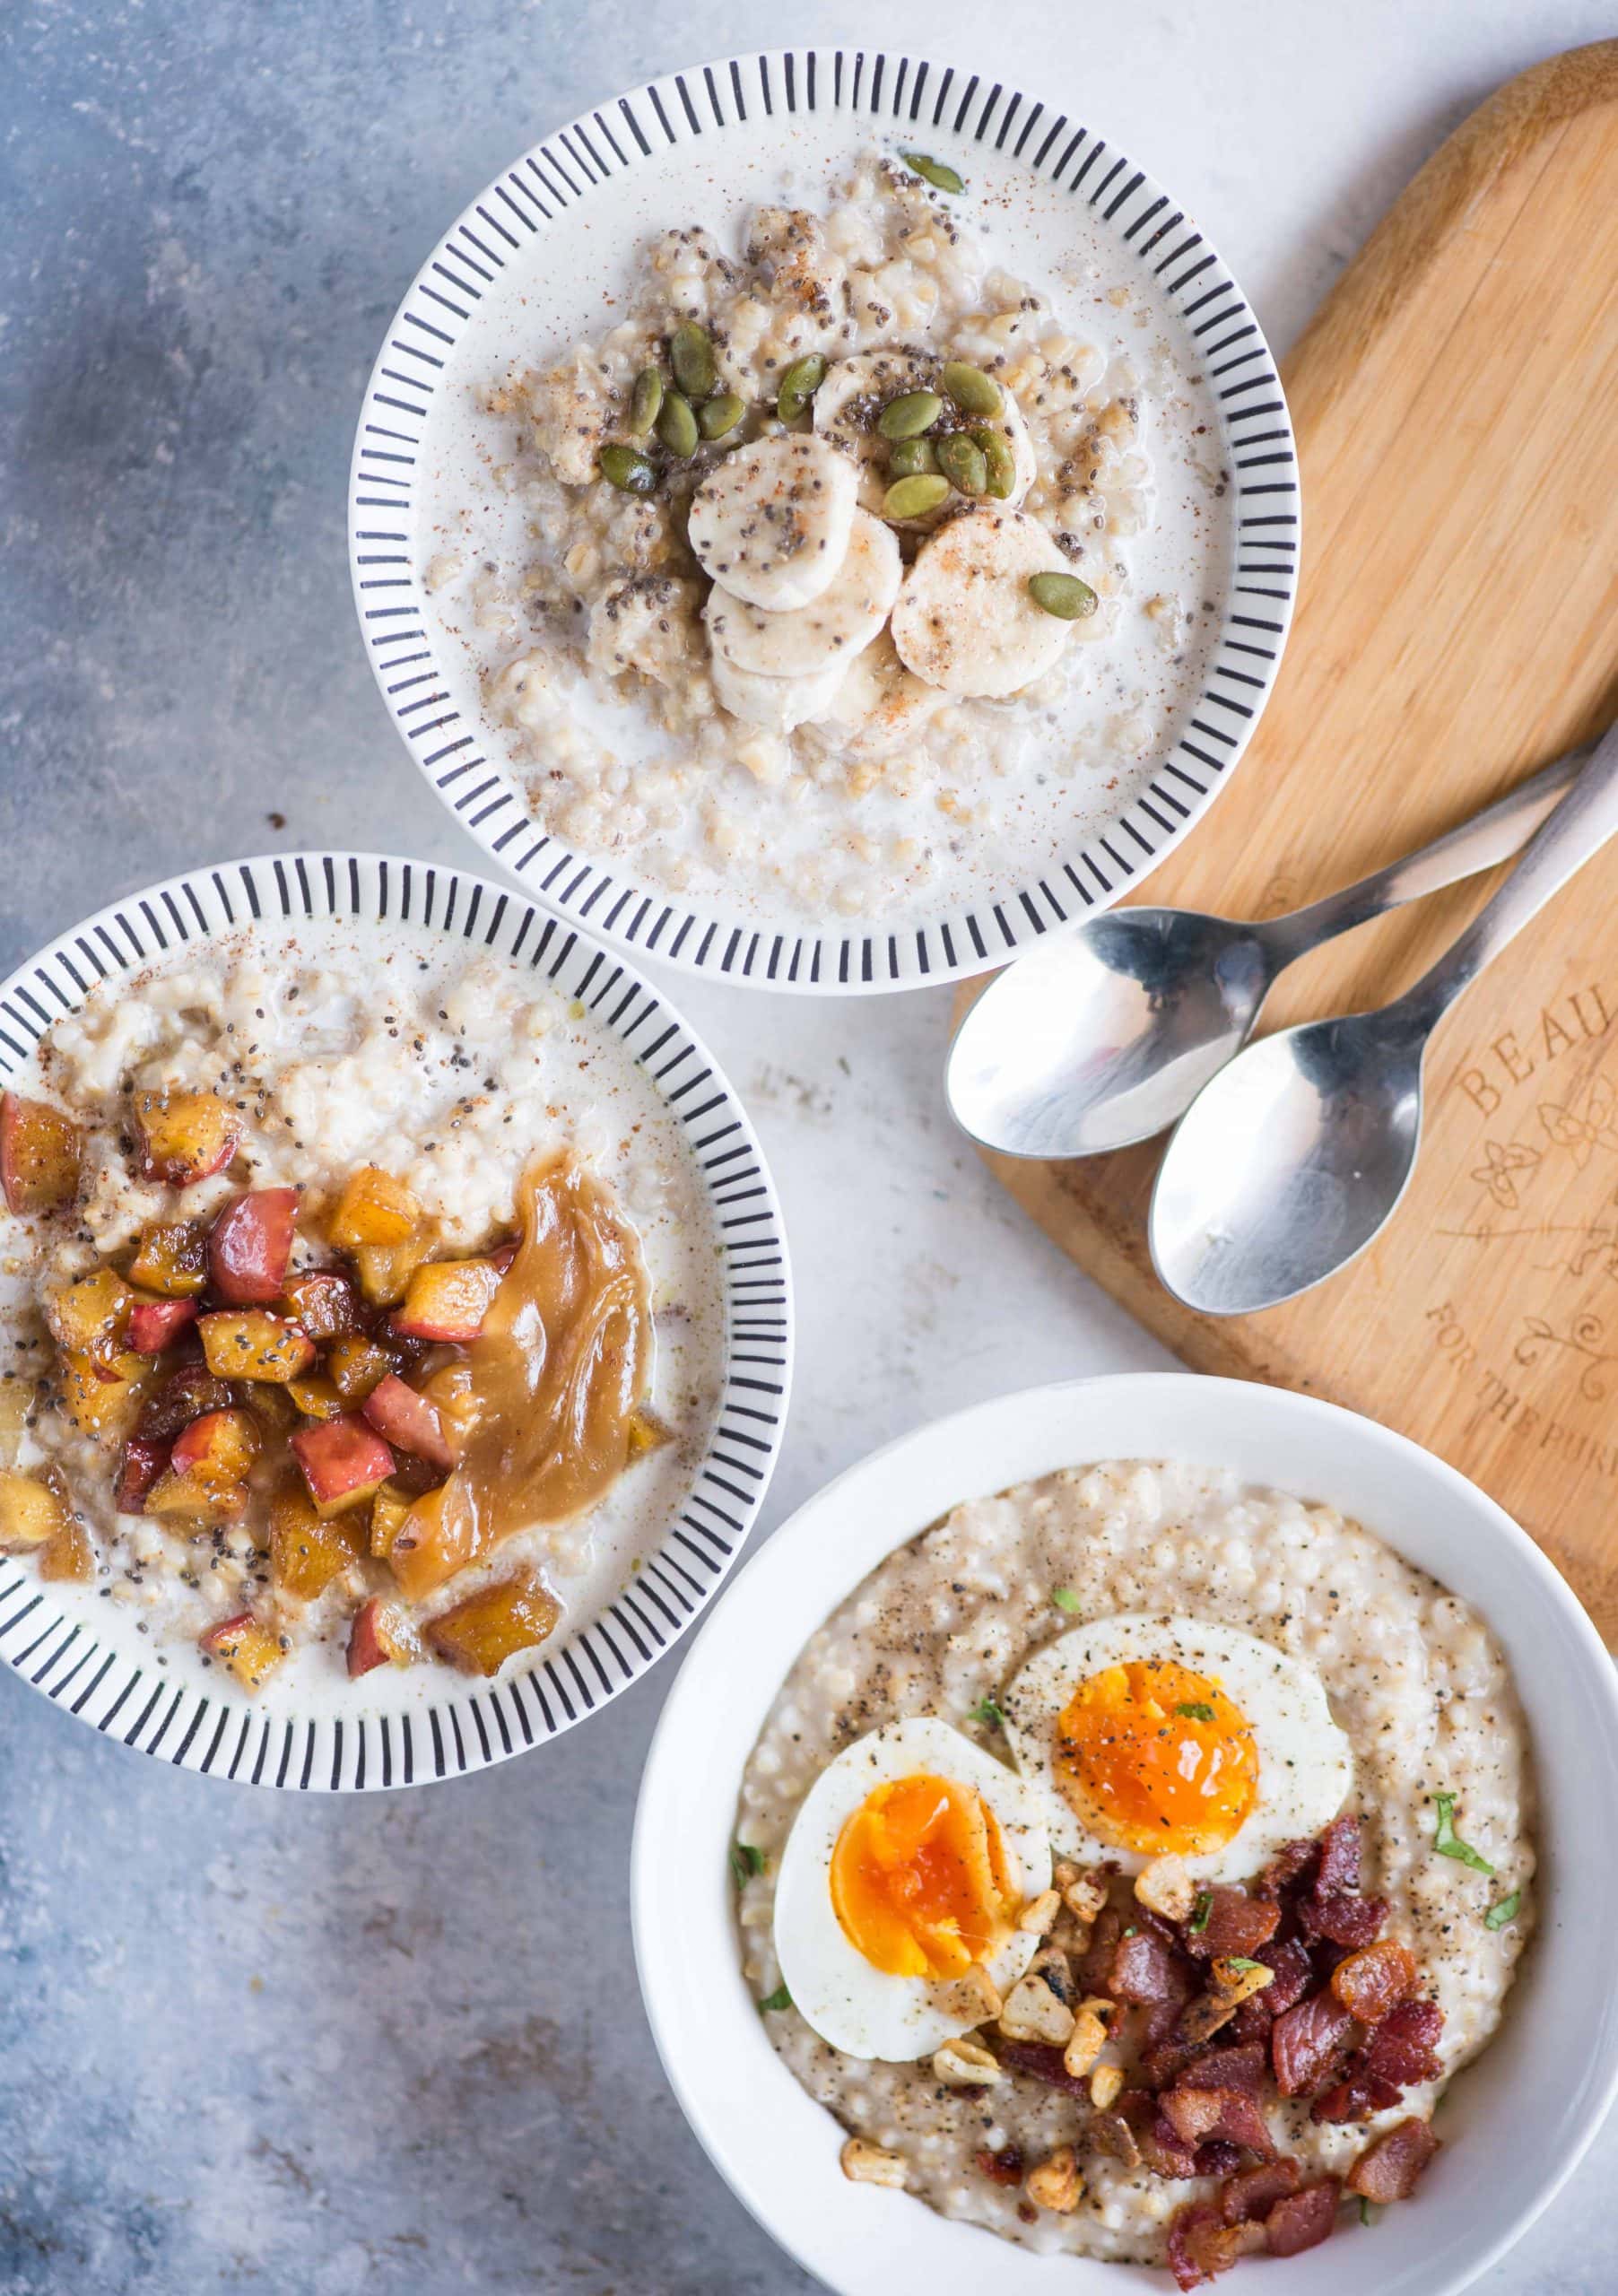 The ultimate guide to cooking Instant Pot Oatmeal with different topping suggestions and tips. Healthy and nutritious breakfast will be ready in less than 15 mins. There are  Instructions for both Steel cut and rolled oats included in the recipe.